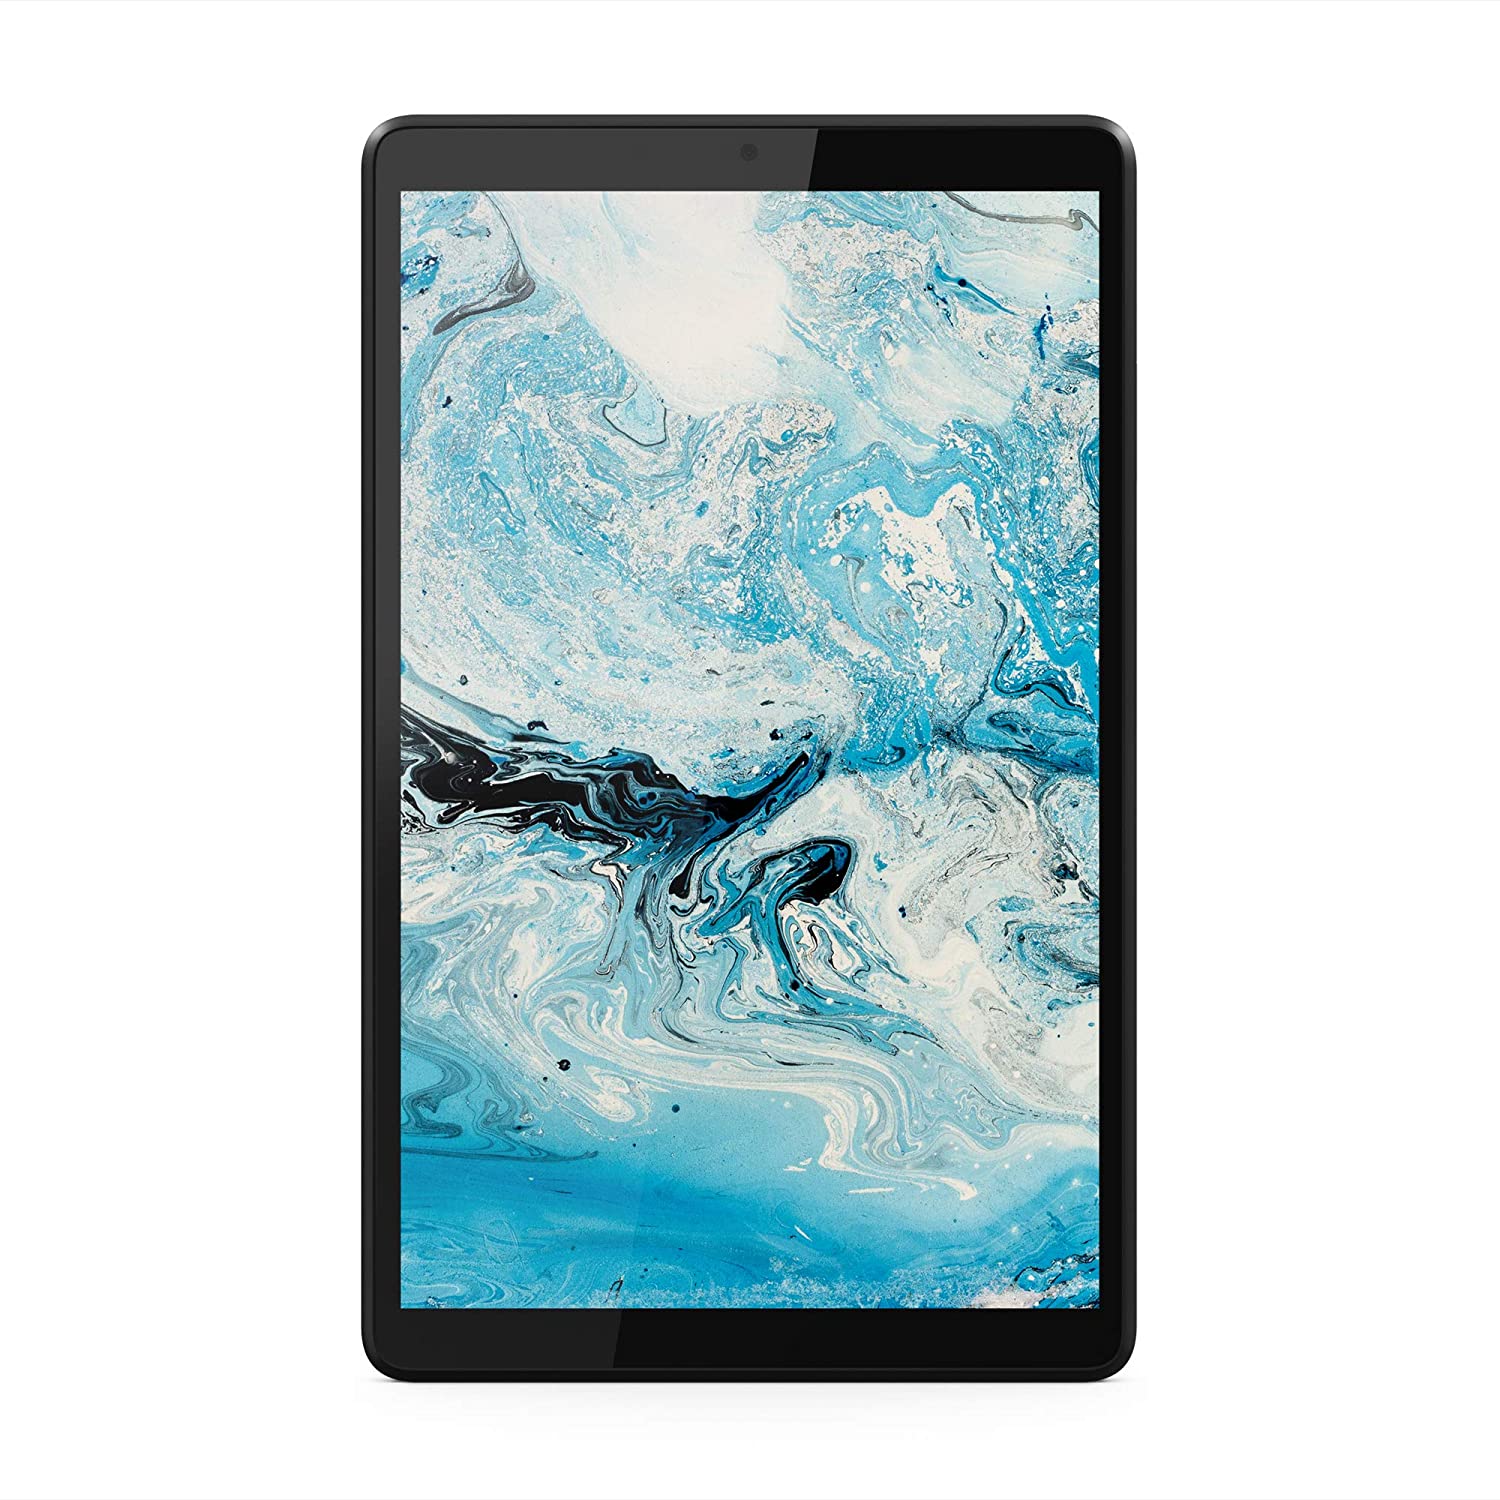 Tab M8 HD (2nd Gen) ZA5G - Tablet - Android 9.0 (Pie) - 16 GB - 8" - image 1 of 7